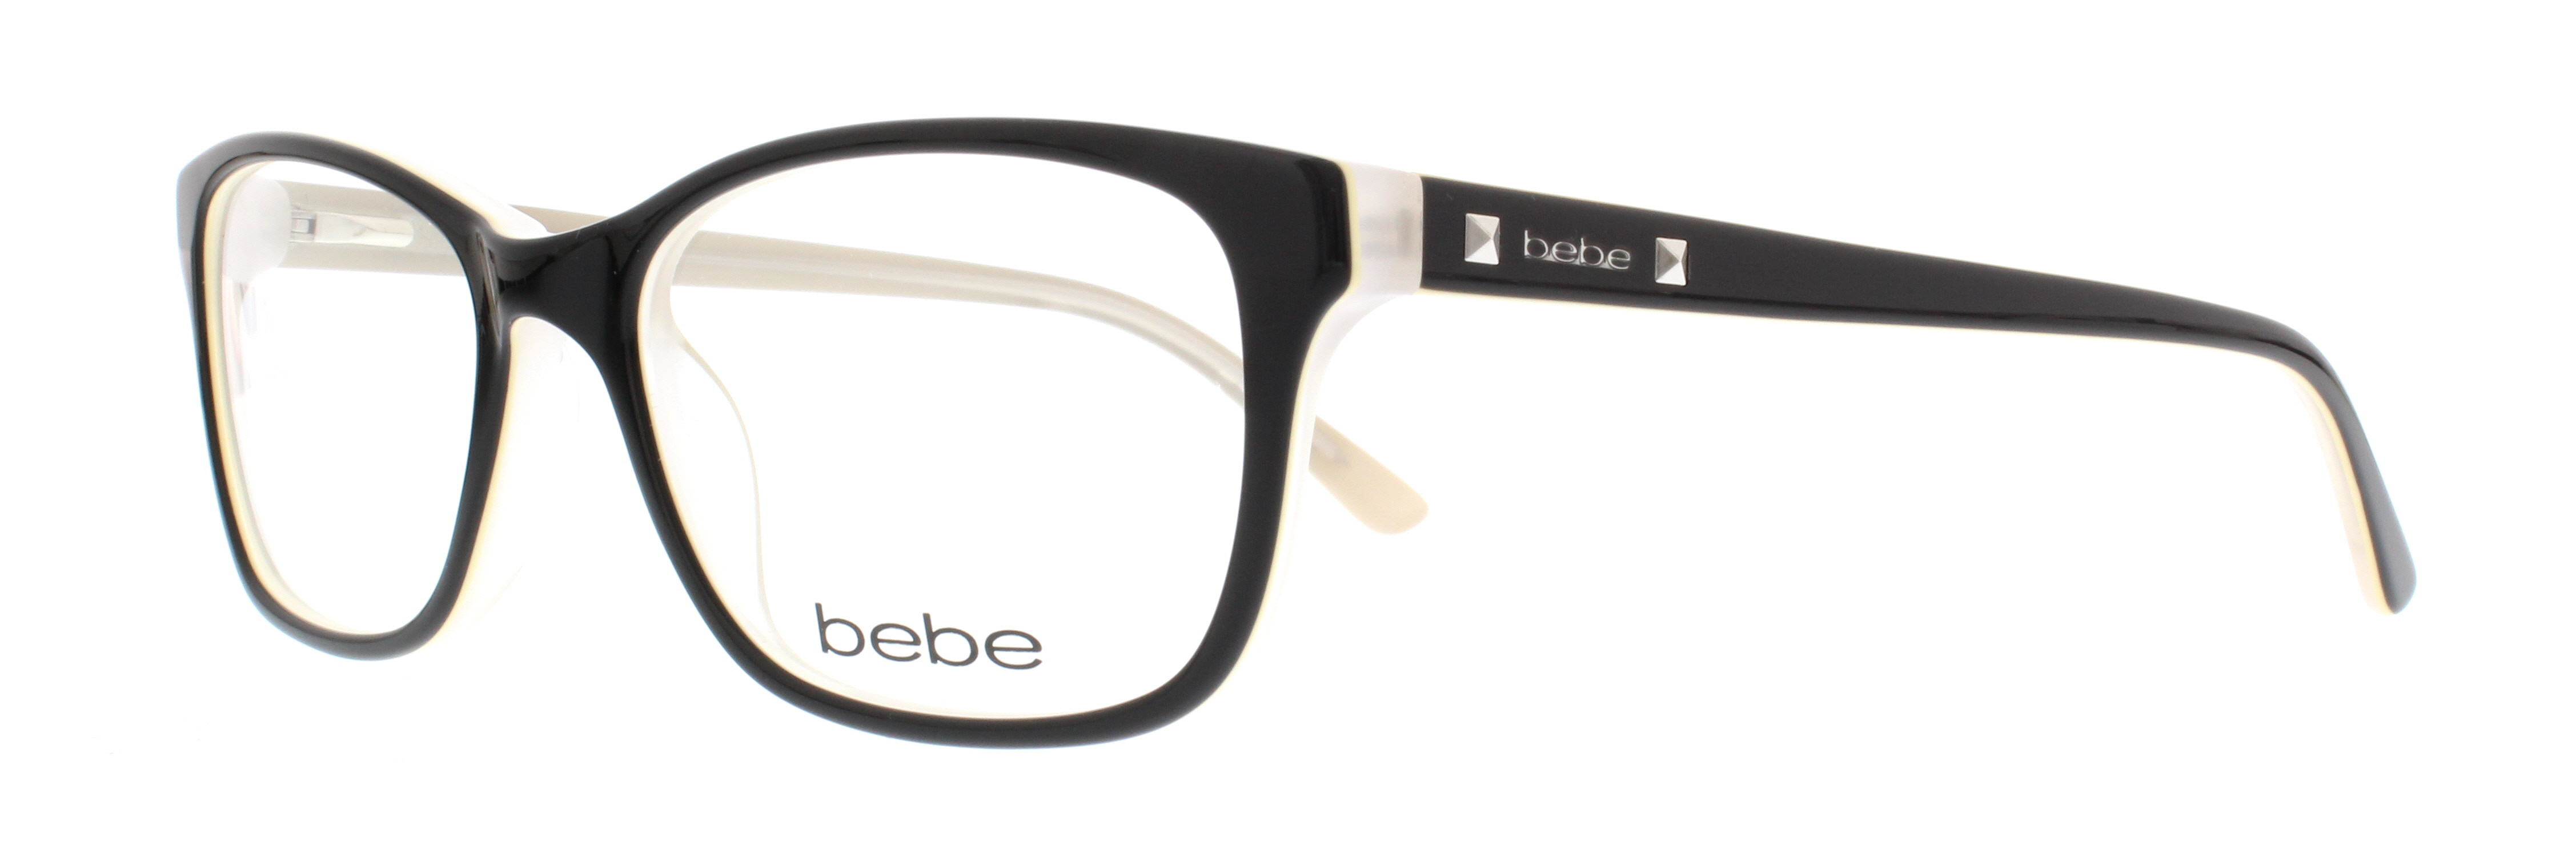 Picture of Bebe Eyeglasses BB5075 Join The Club